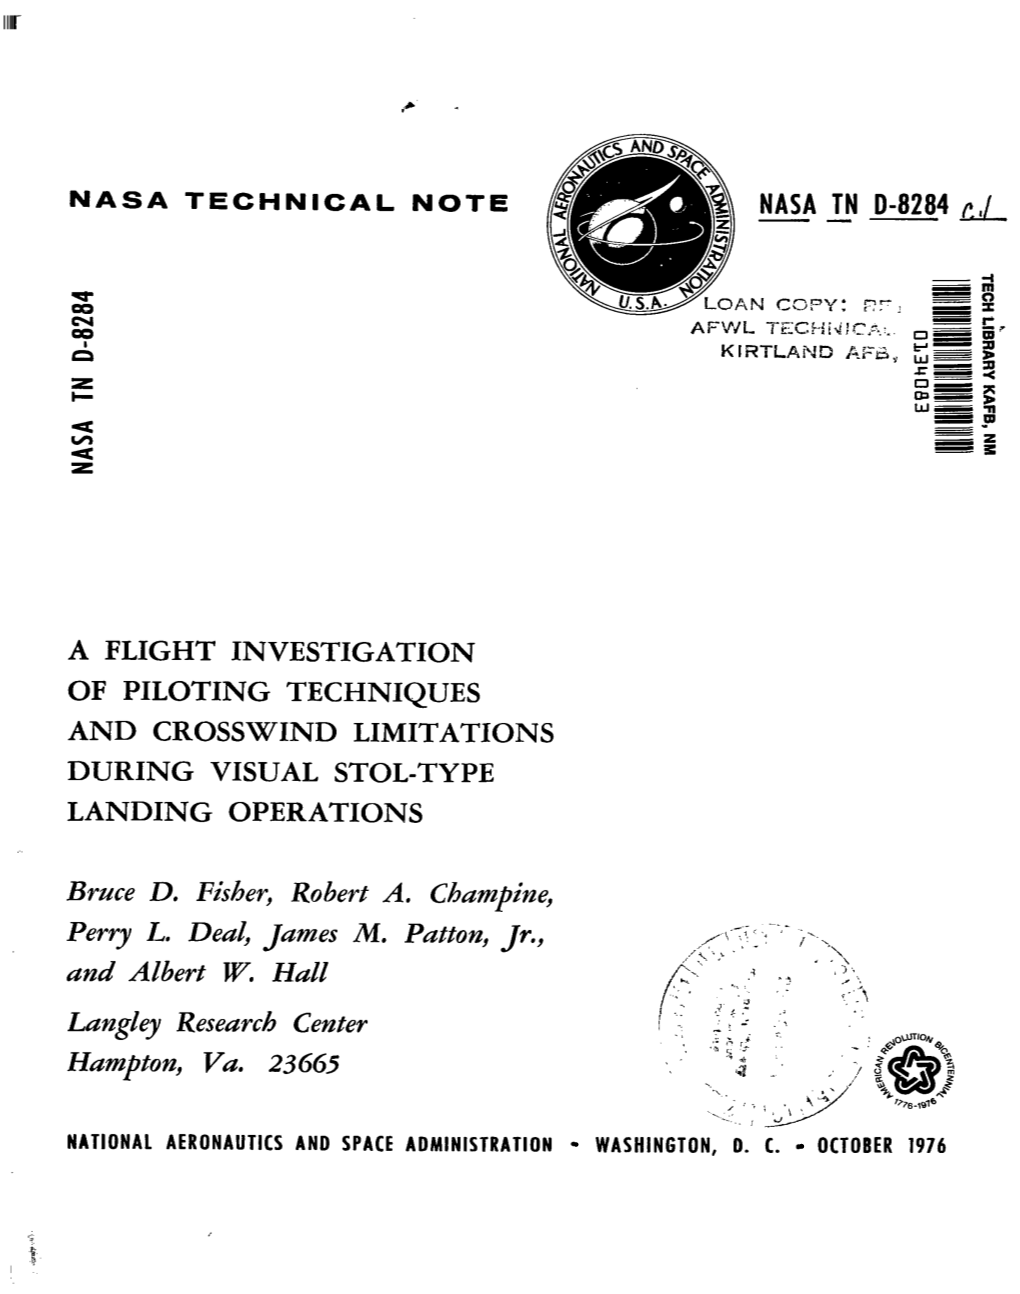 A Flight Investigation of Piloting Techniques and Crosswind Limitations During Visual Stol-Type Landing Operations